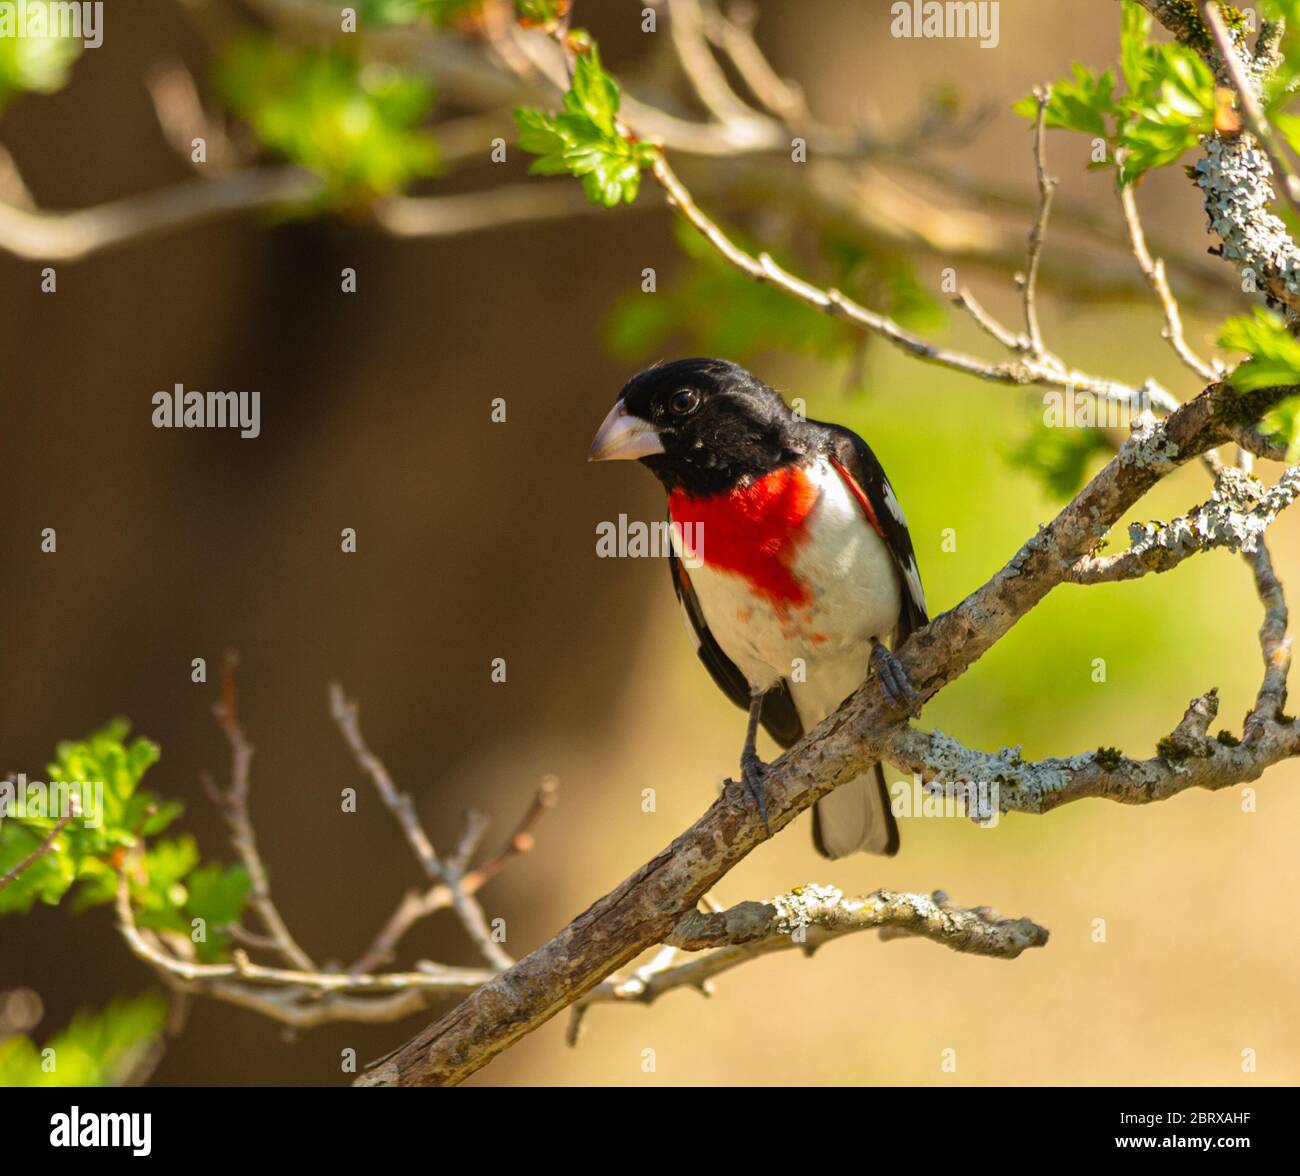 Rose-breasted grosbeak perched on the branch of a tree in the woods. Stock Photo